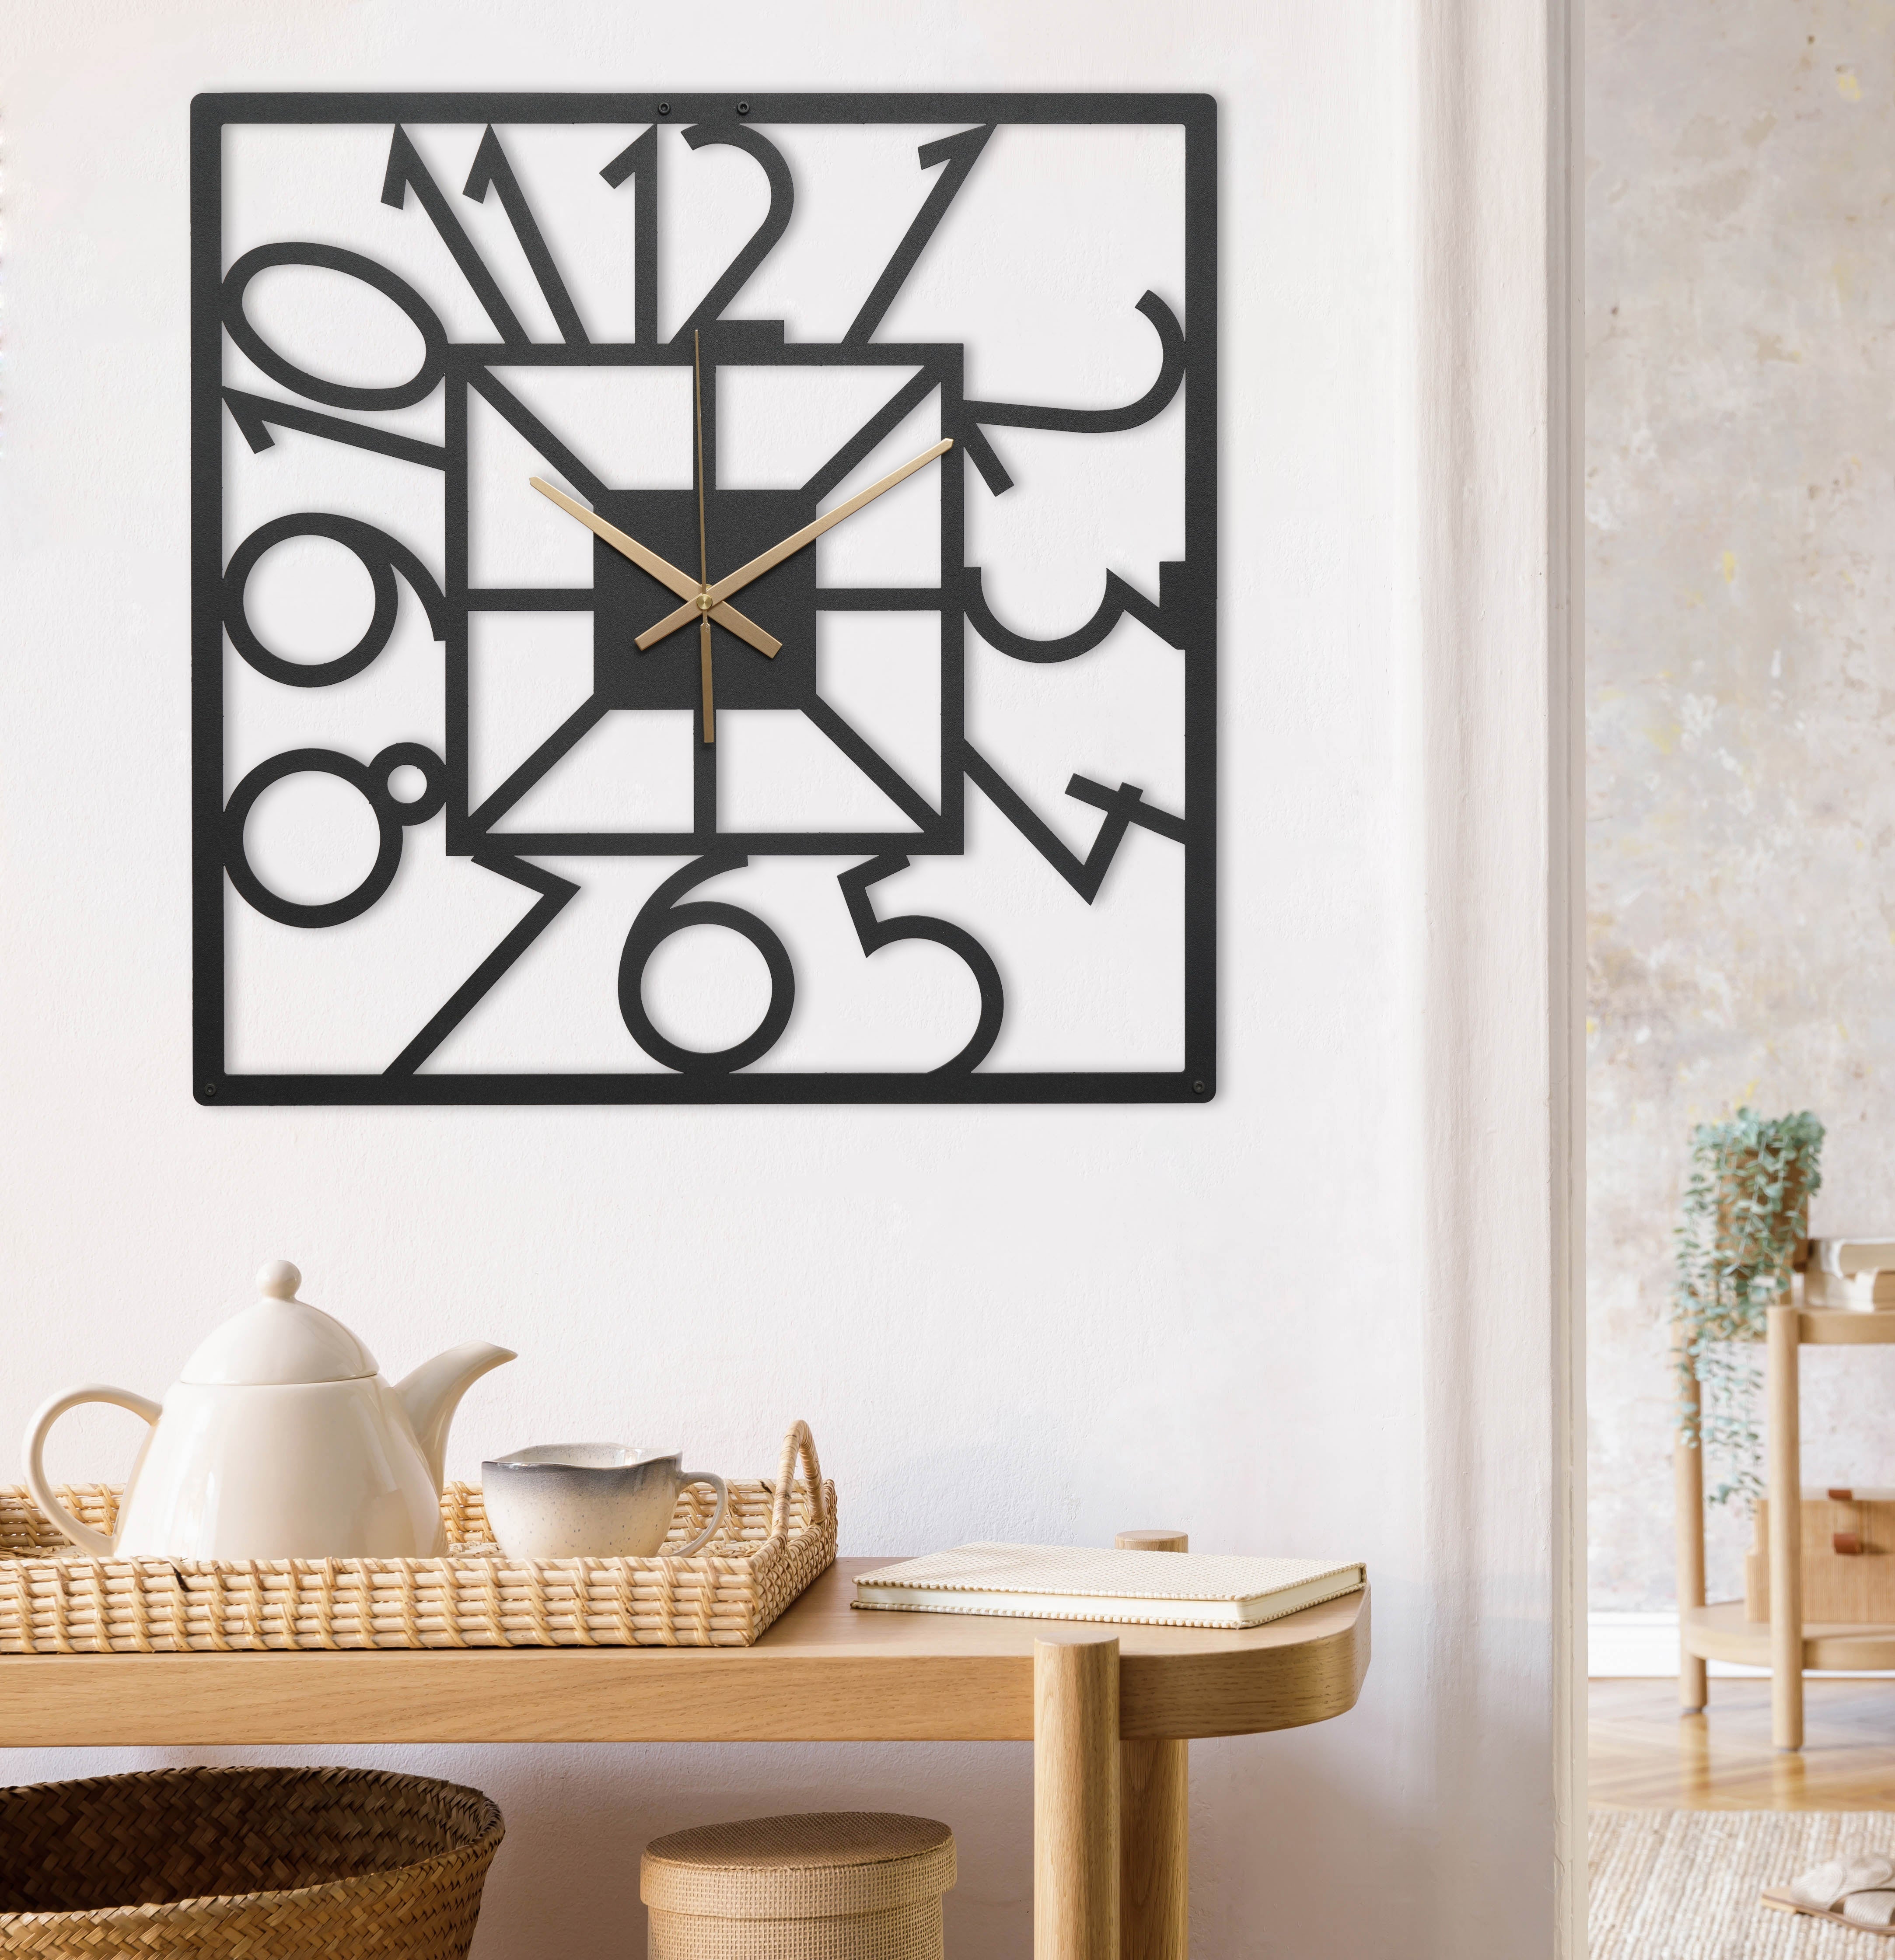 Square Wall Clock With Numbers